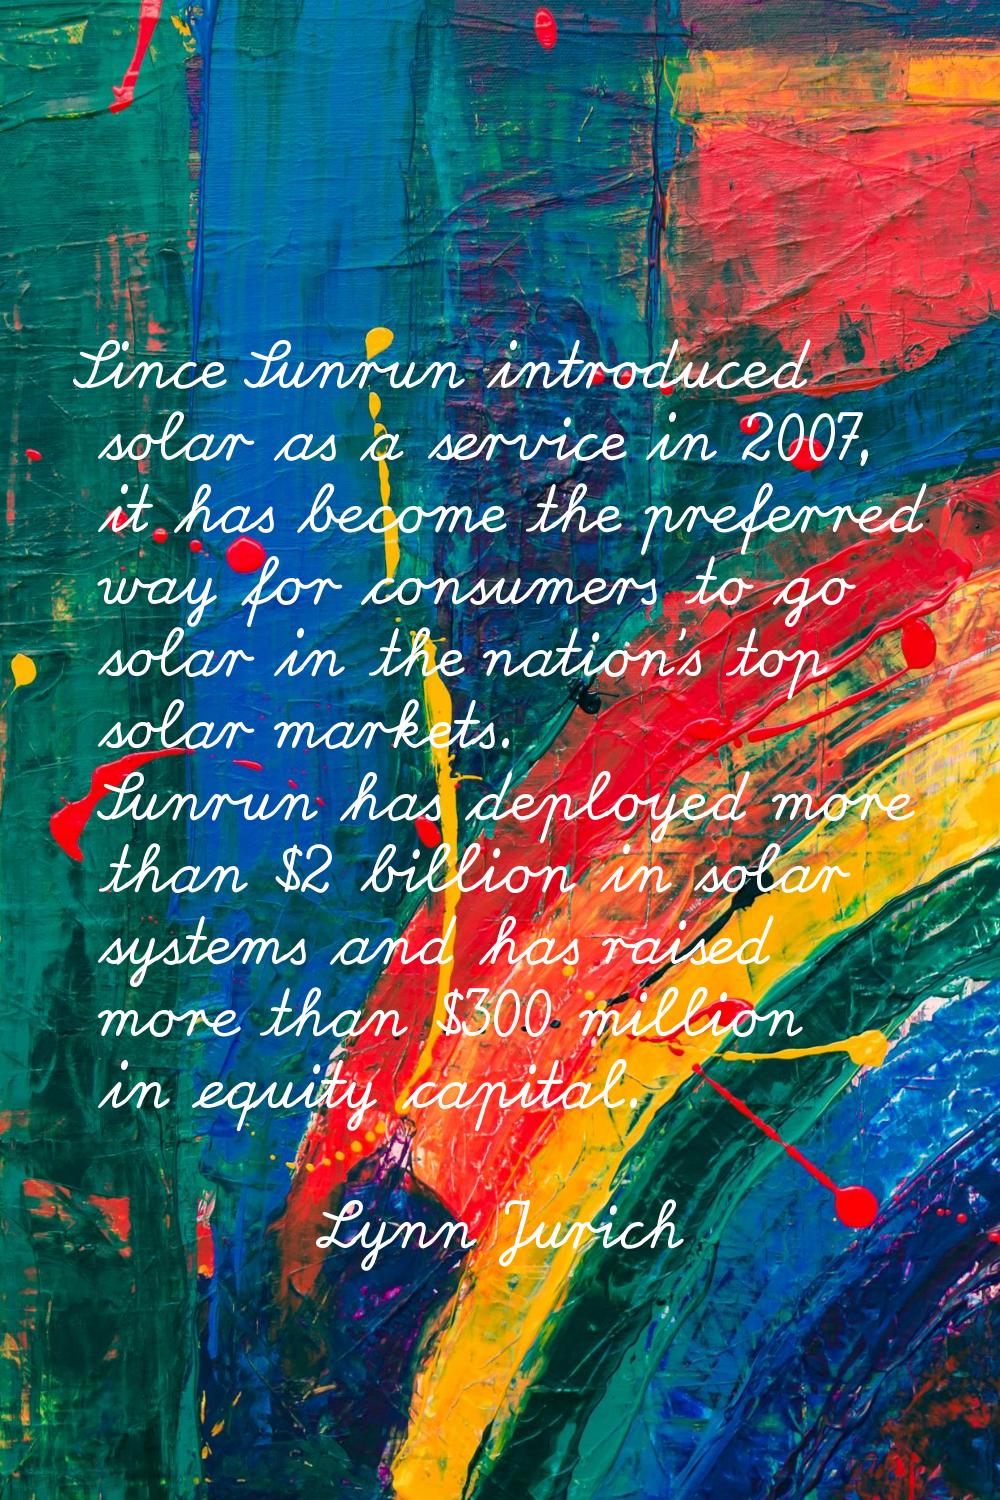 Since Sunrun introduced solar as a service in 2007, it has become the preferred way for consumers t